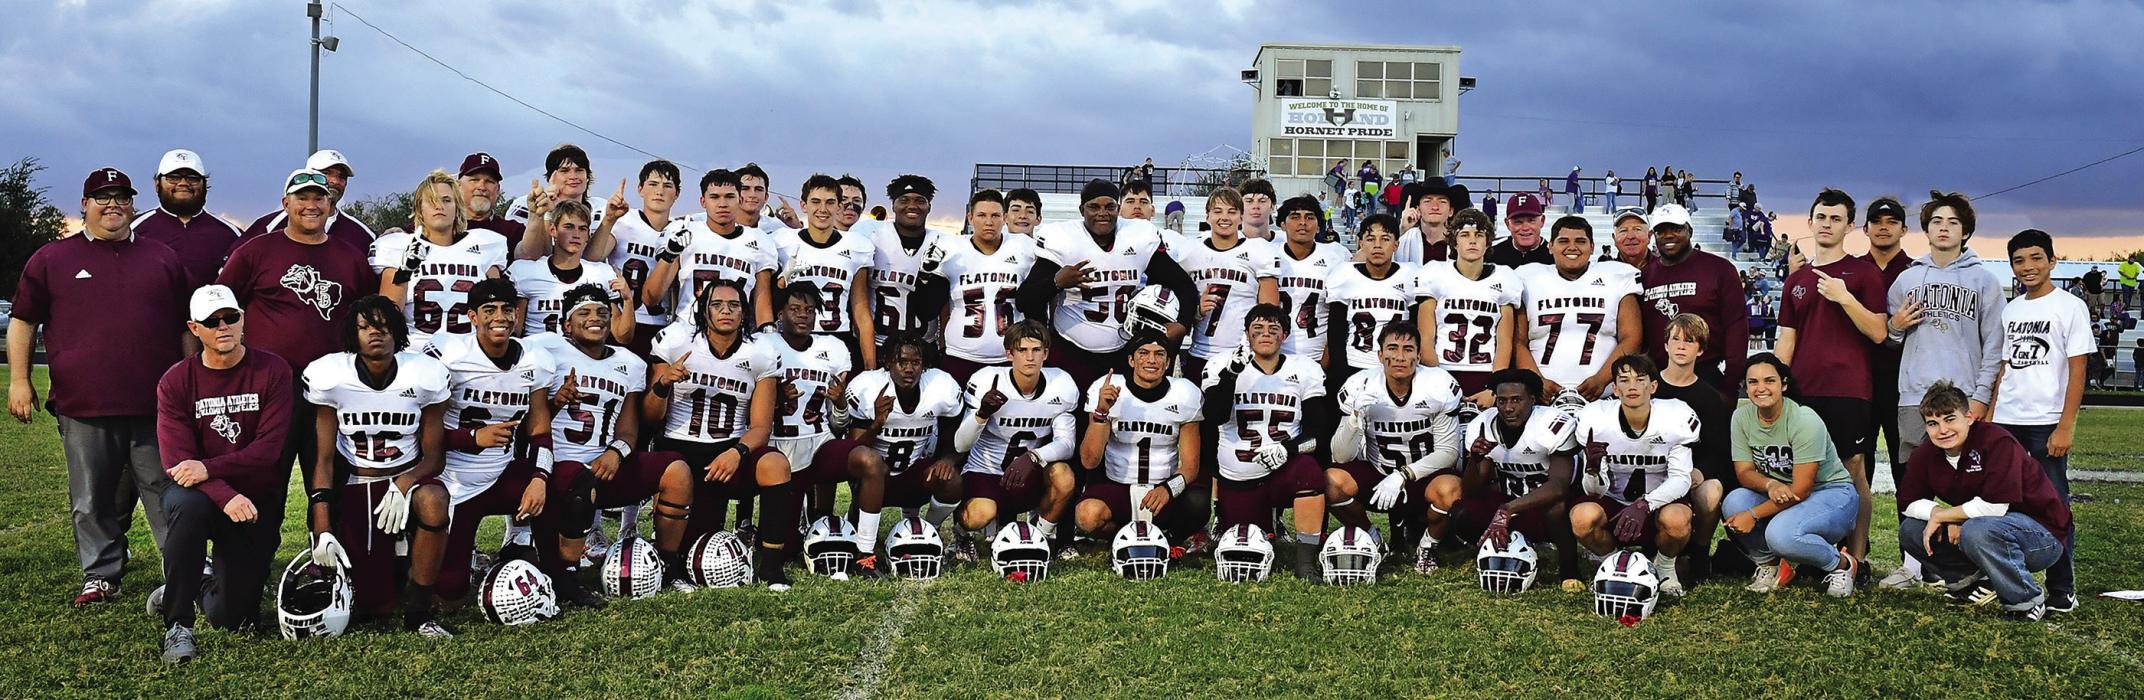 The Flatonia Bulldogs earned the title of District Champions on Friday after defeating the Holland Hornets 49-17. The Bulldogs traveled to Holland as a last minute decision was agreed upon to play at 4 p.m. on Friday afternoon to avoid inclement weather. The Bulldogs will travel to San Antonio next Thursday to take on Junction in the Bi-District playoff game. Photo by Stephanie Steinhauser